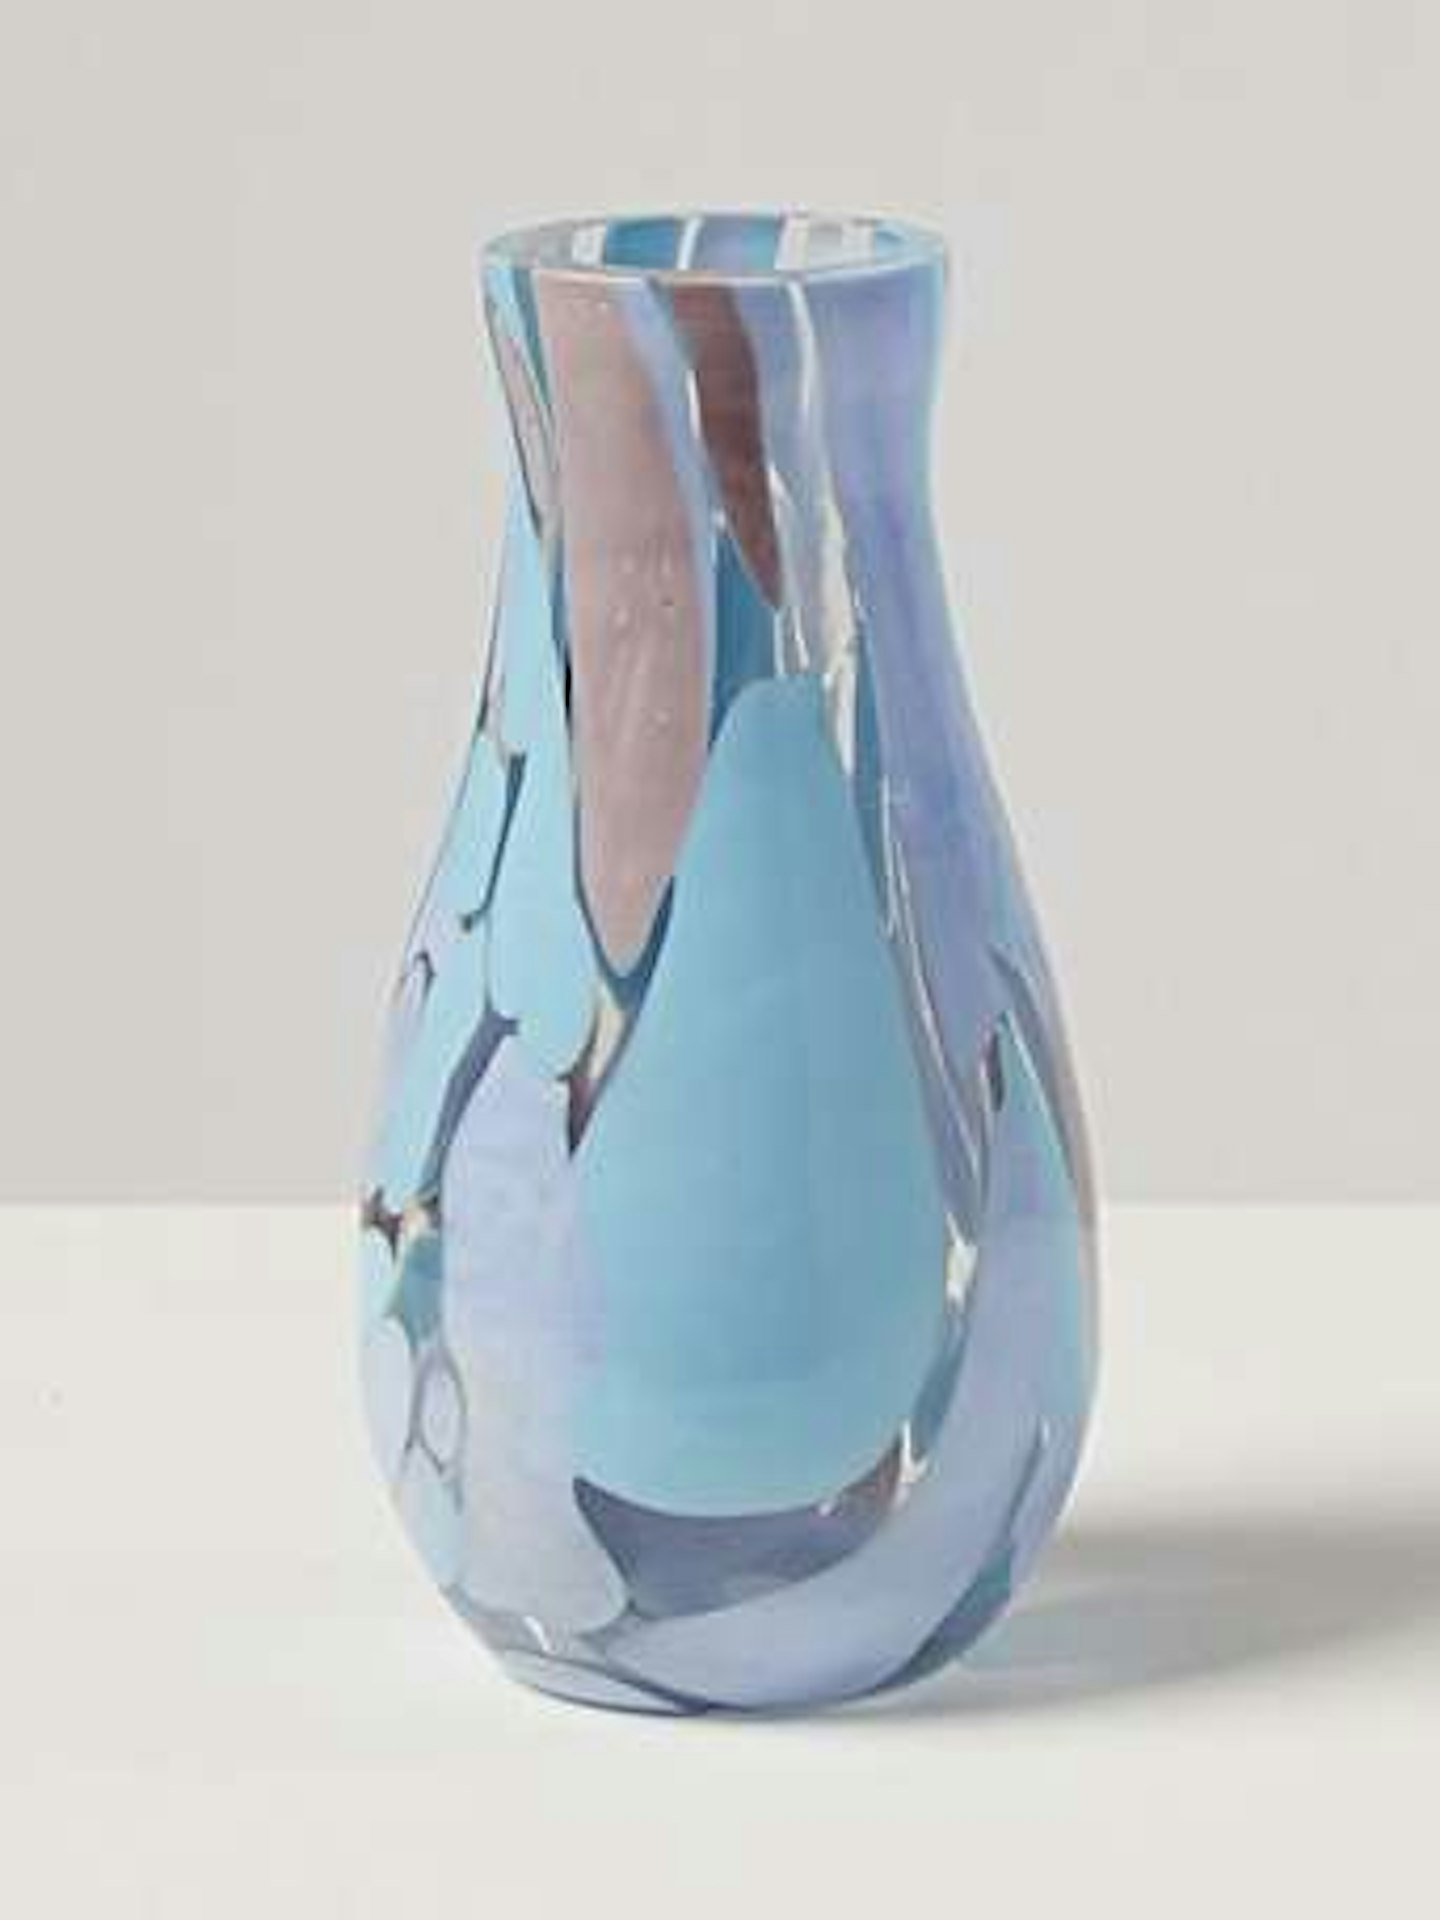 Oliver Bonas, Lasi Blue & Pink Glass Diffuser Vessel, WAS £7, NOW £3.50